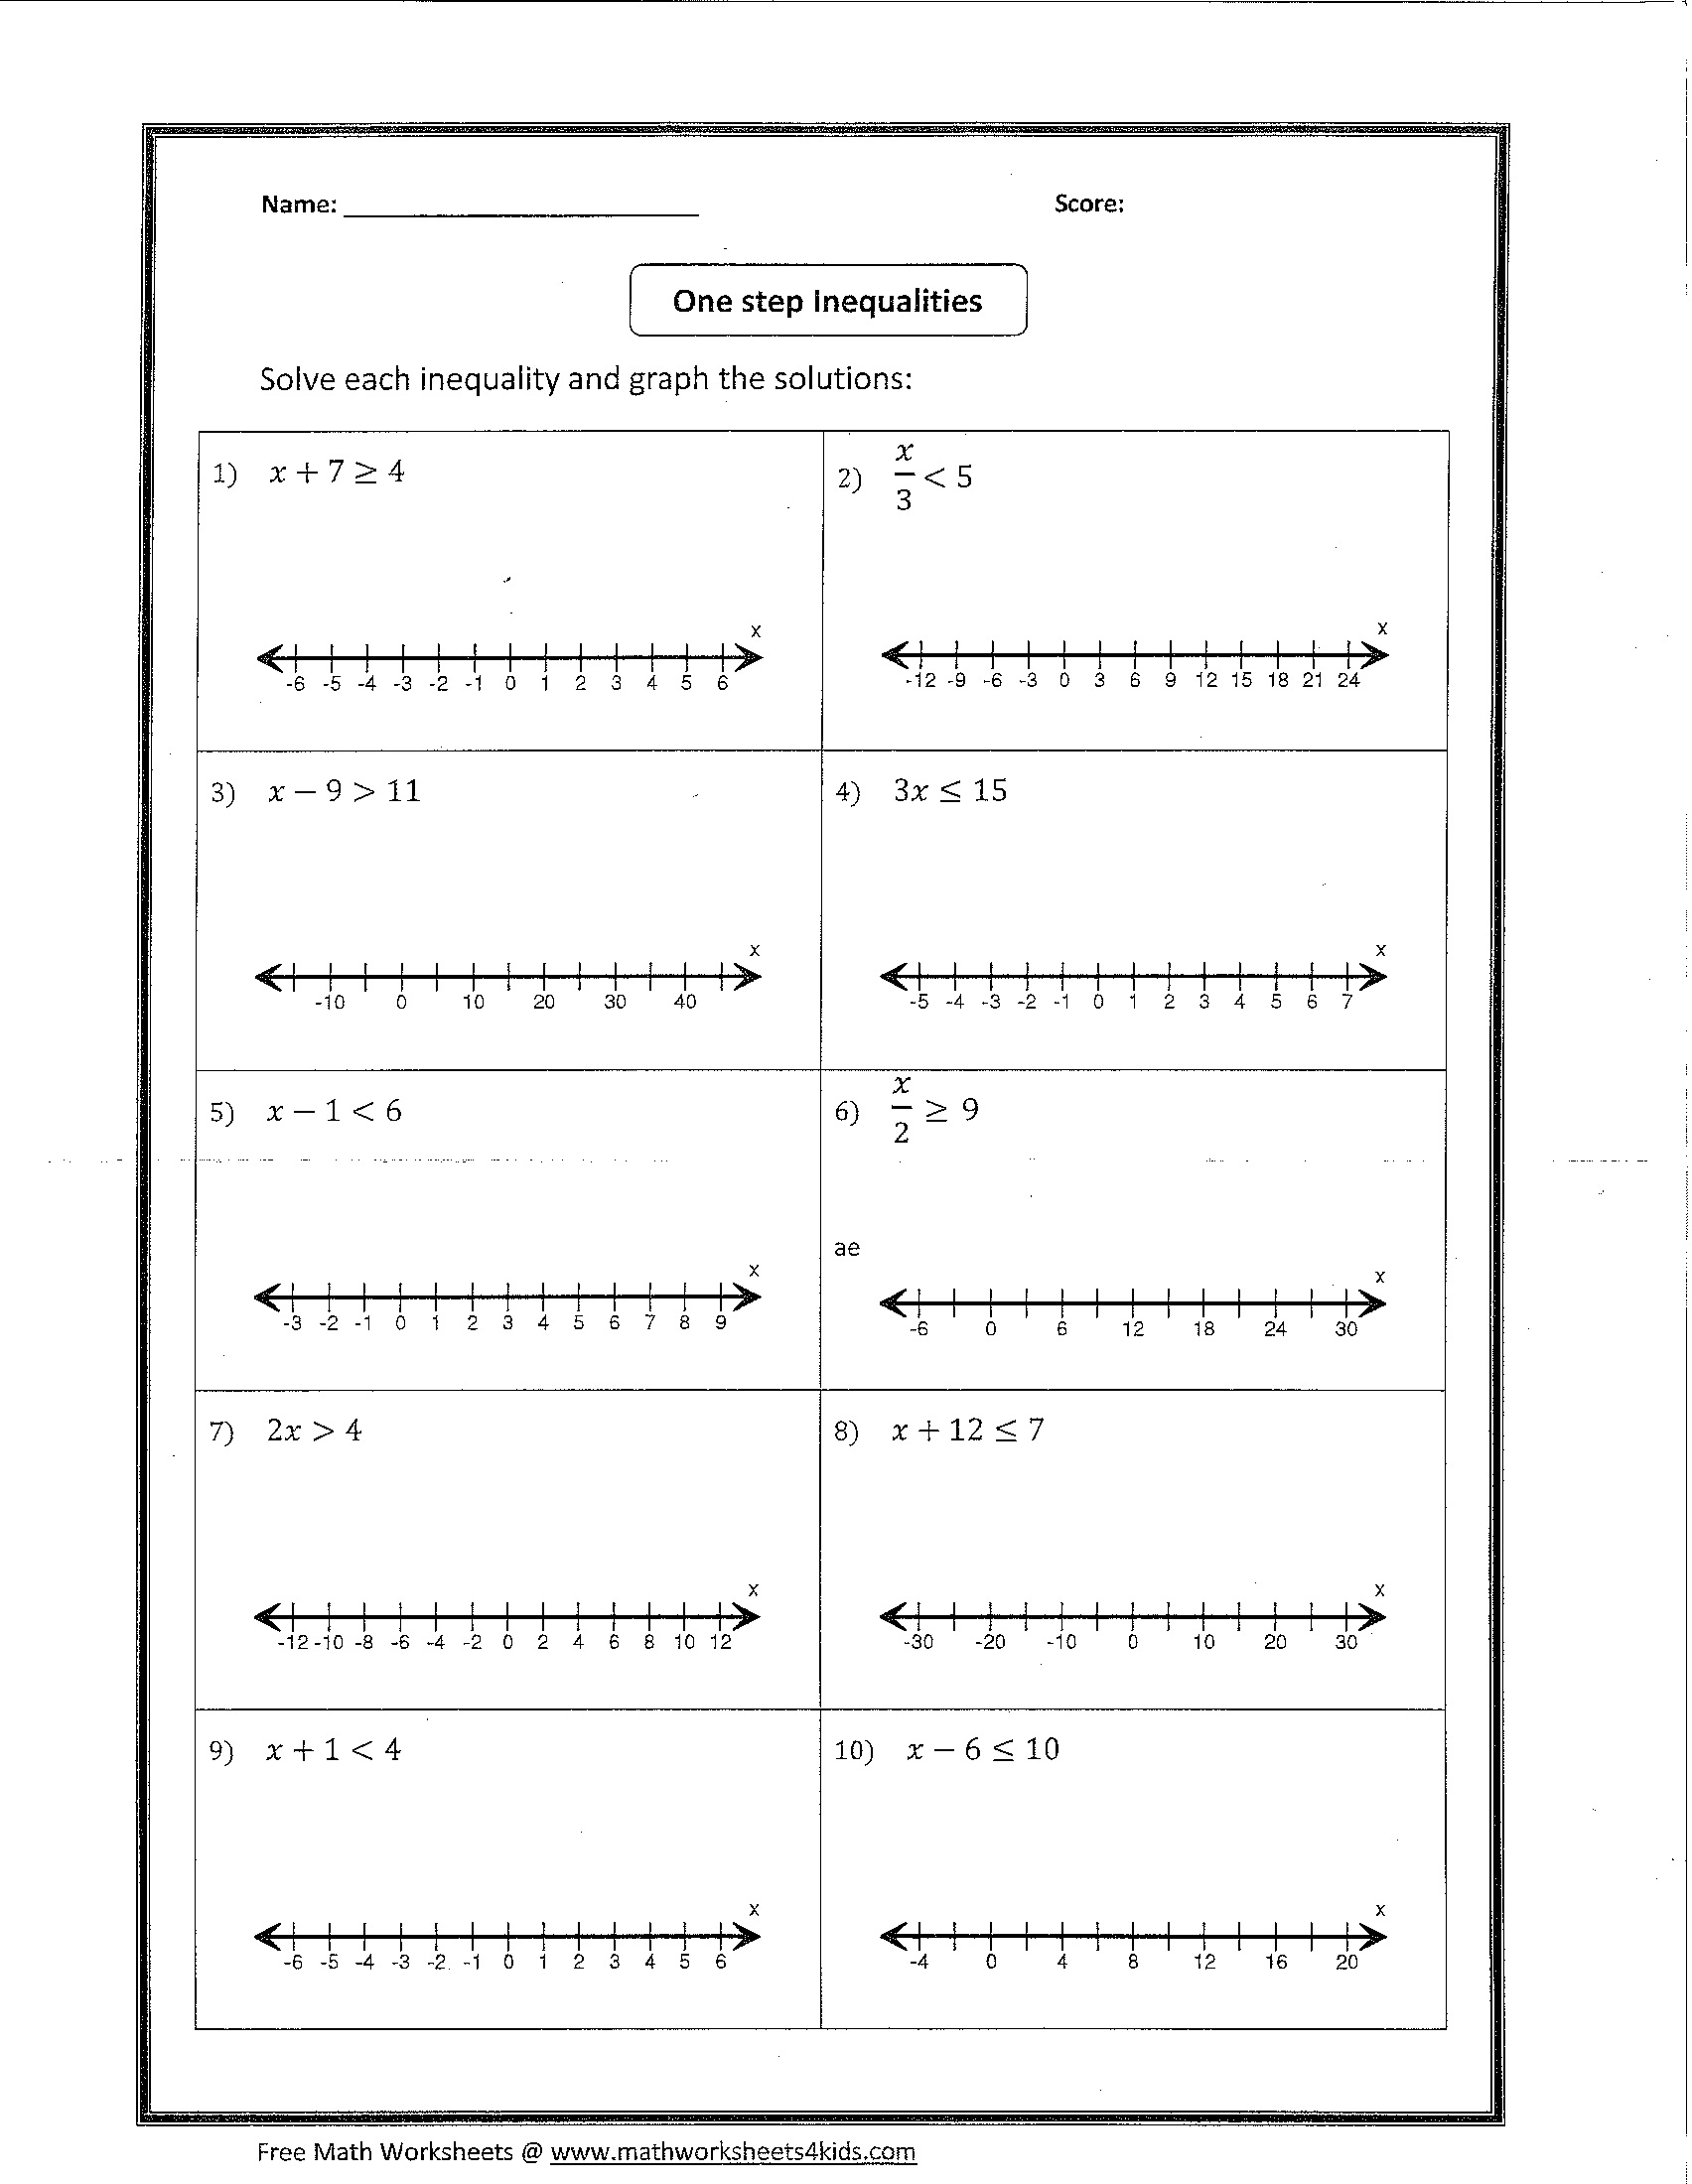 Graphing Basic Inequalities On A Number Line Worksheet